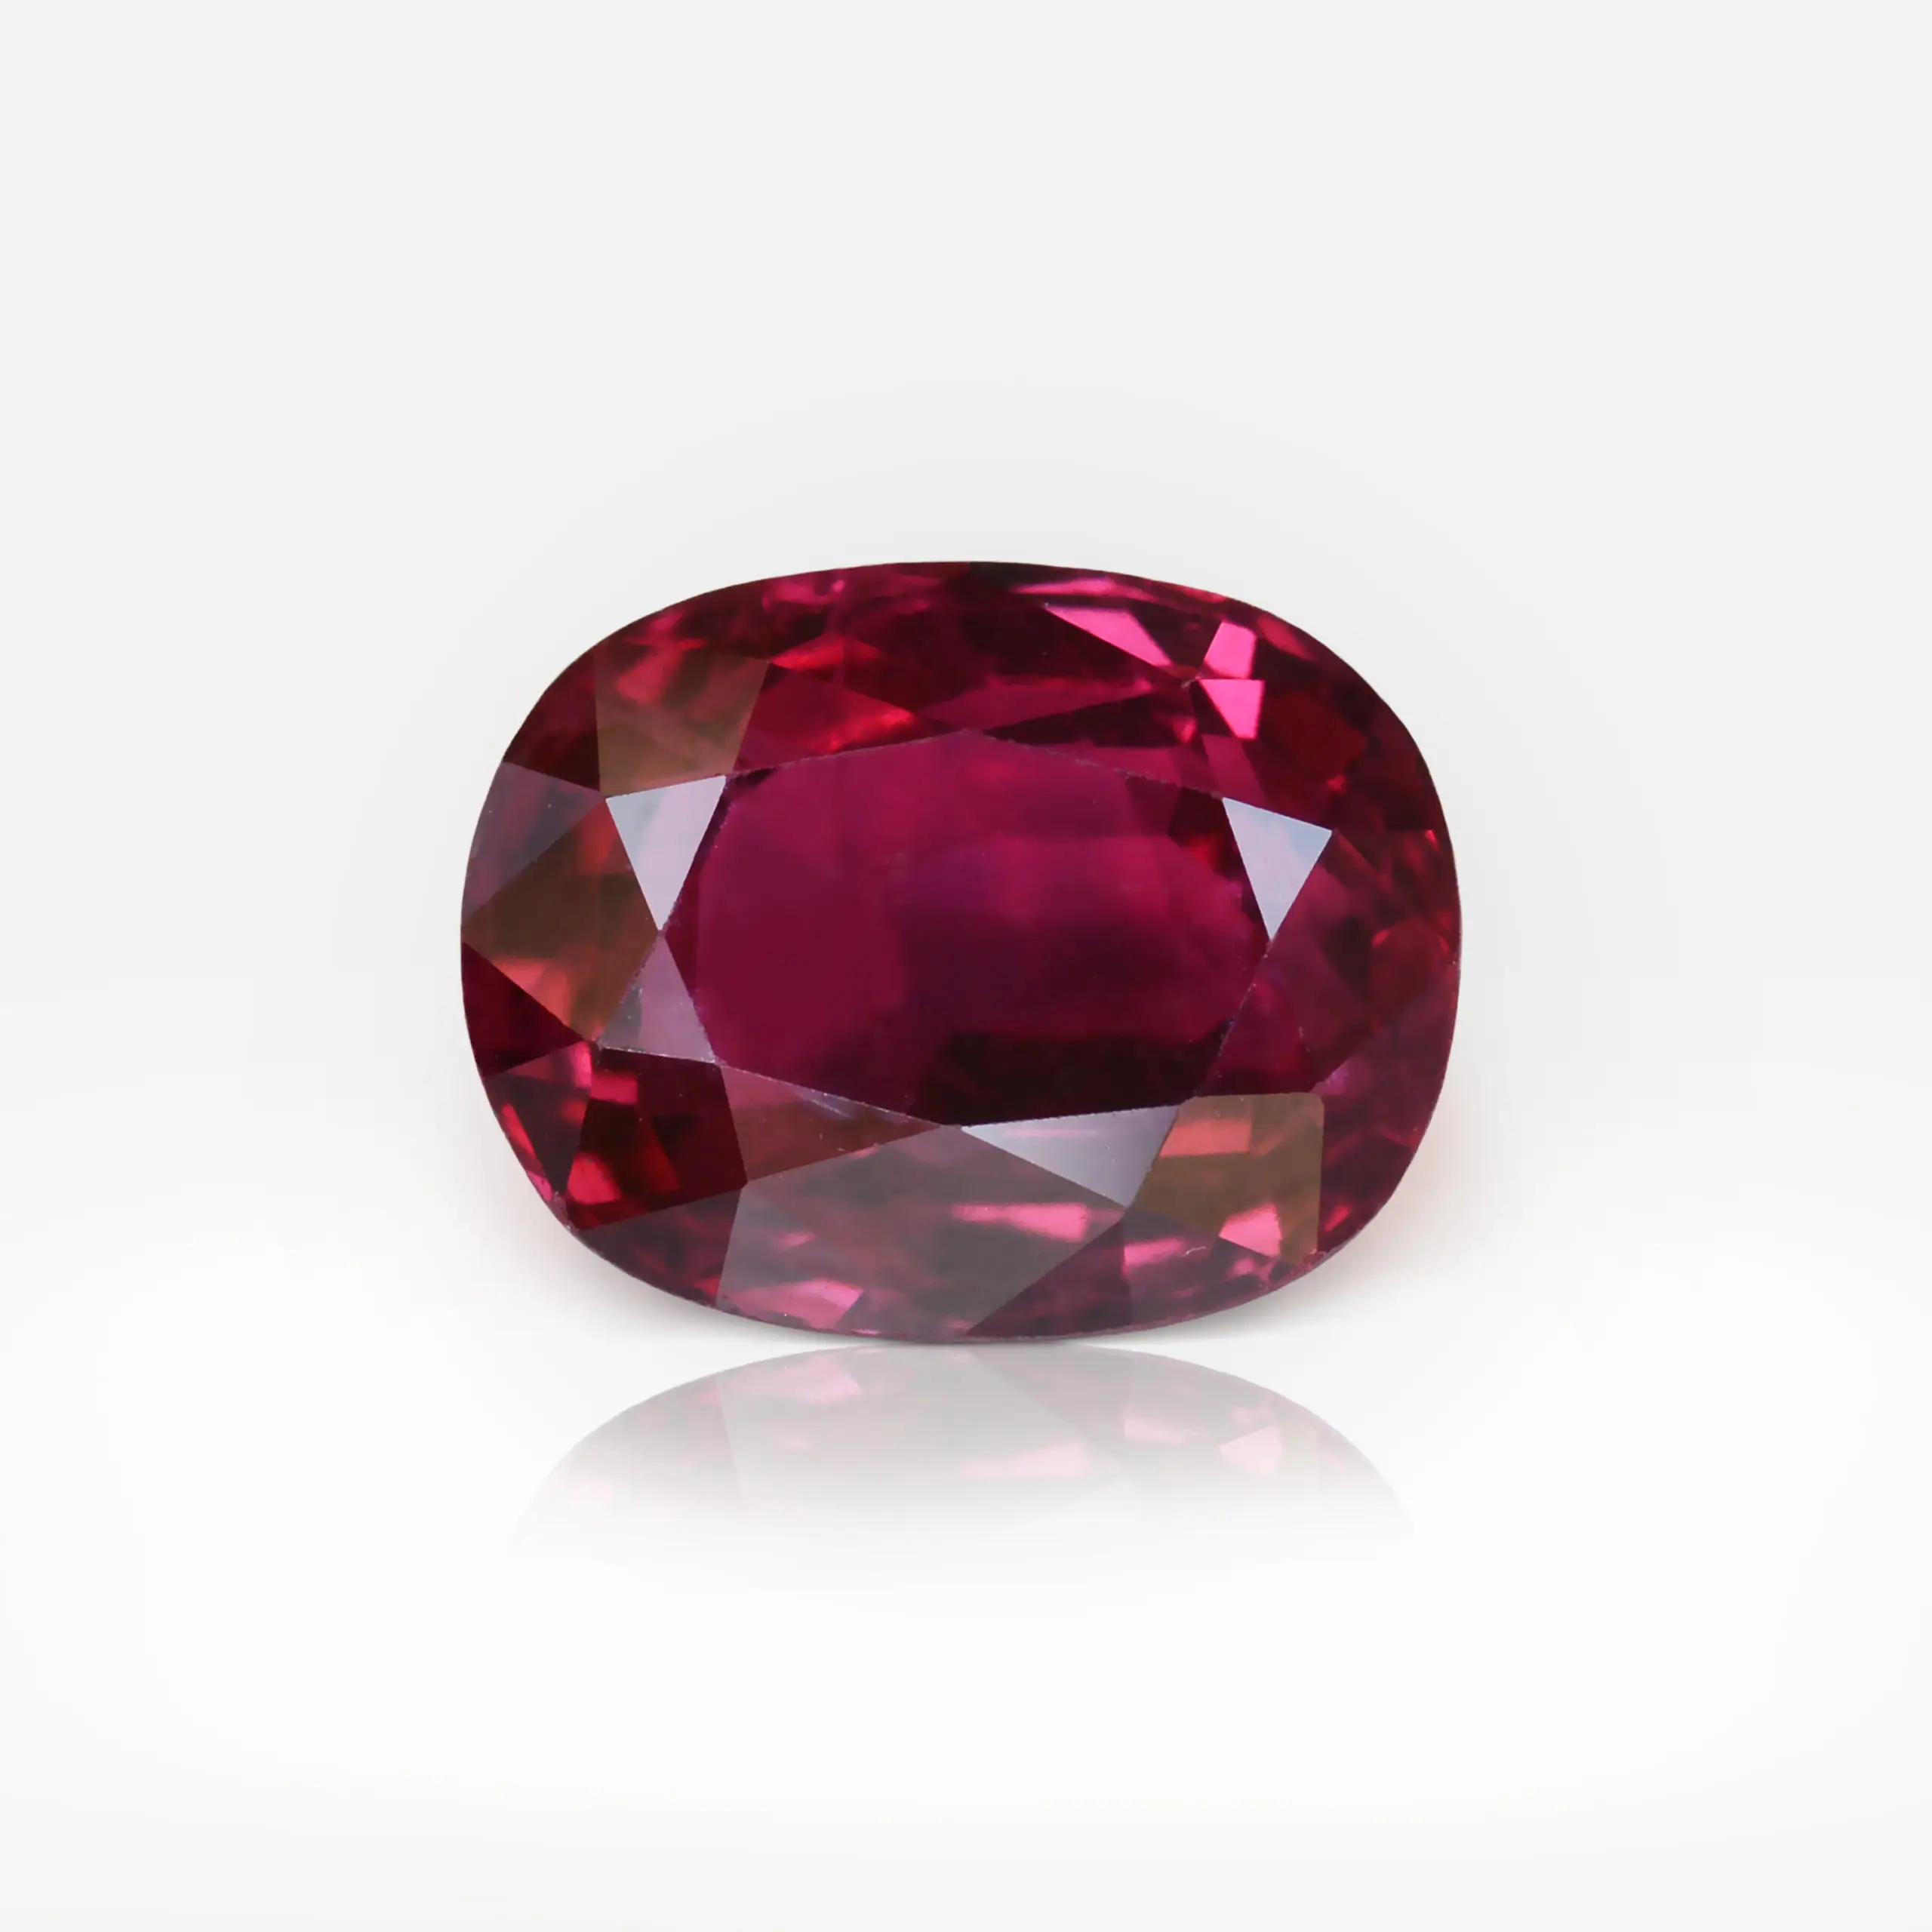 2.60 carat Oval Shape Thailand Ruby CGL - picture 1